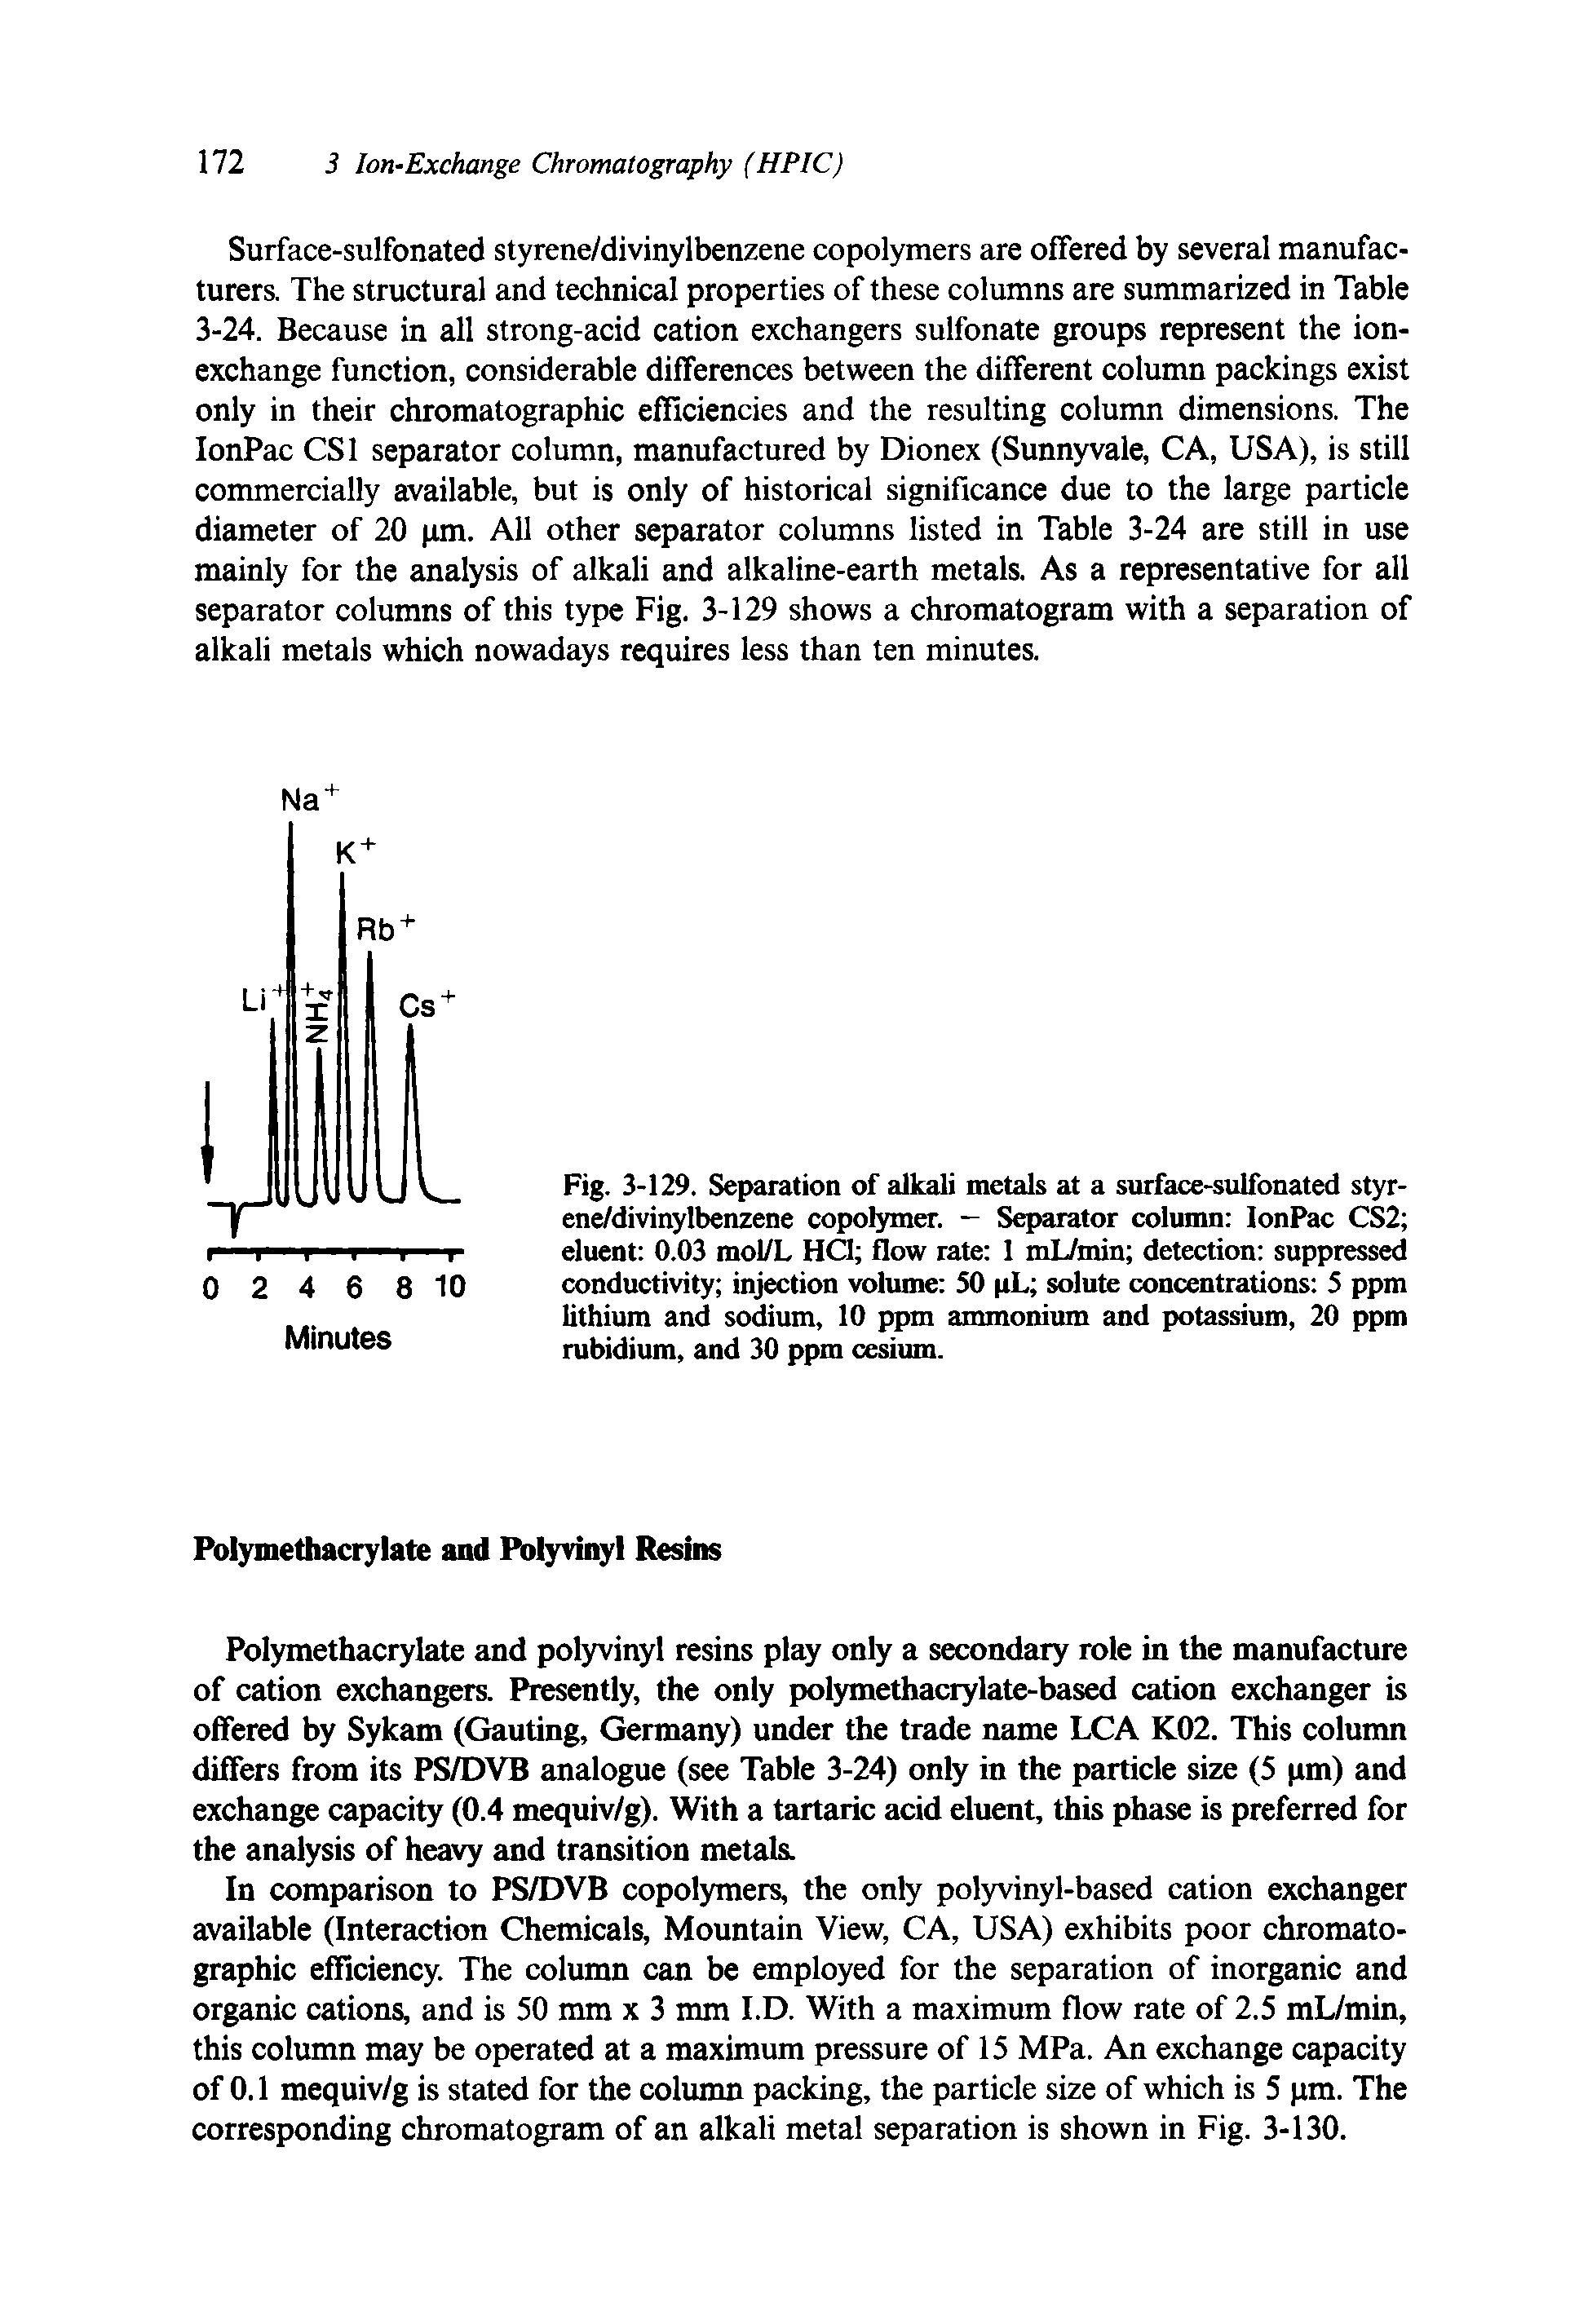 Fig. 3-129. Separation of alkali metals at a surface-sulfonated styrene/divinylbenzene copolymer. — Separator column IonPac CS2 eluent 0.03 mol/L HC1 flow rate 1 mL/min detection suppressed conductivity injection volume 50 pL solute concentrations 5 ppm lithium and sodium, 10 ppm ammonium and potassium, 20 ppm rubidium, and 30 ppm cesium.